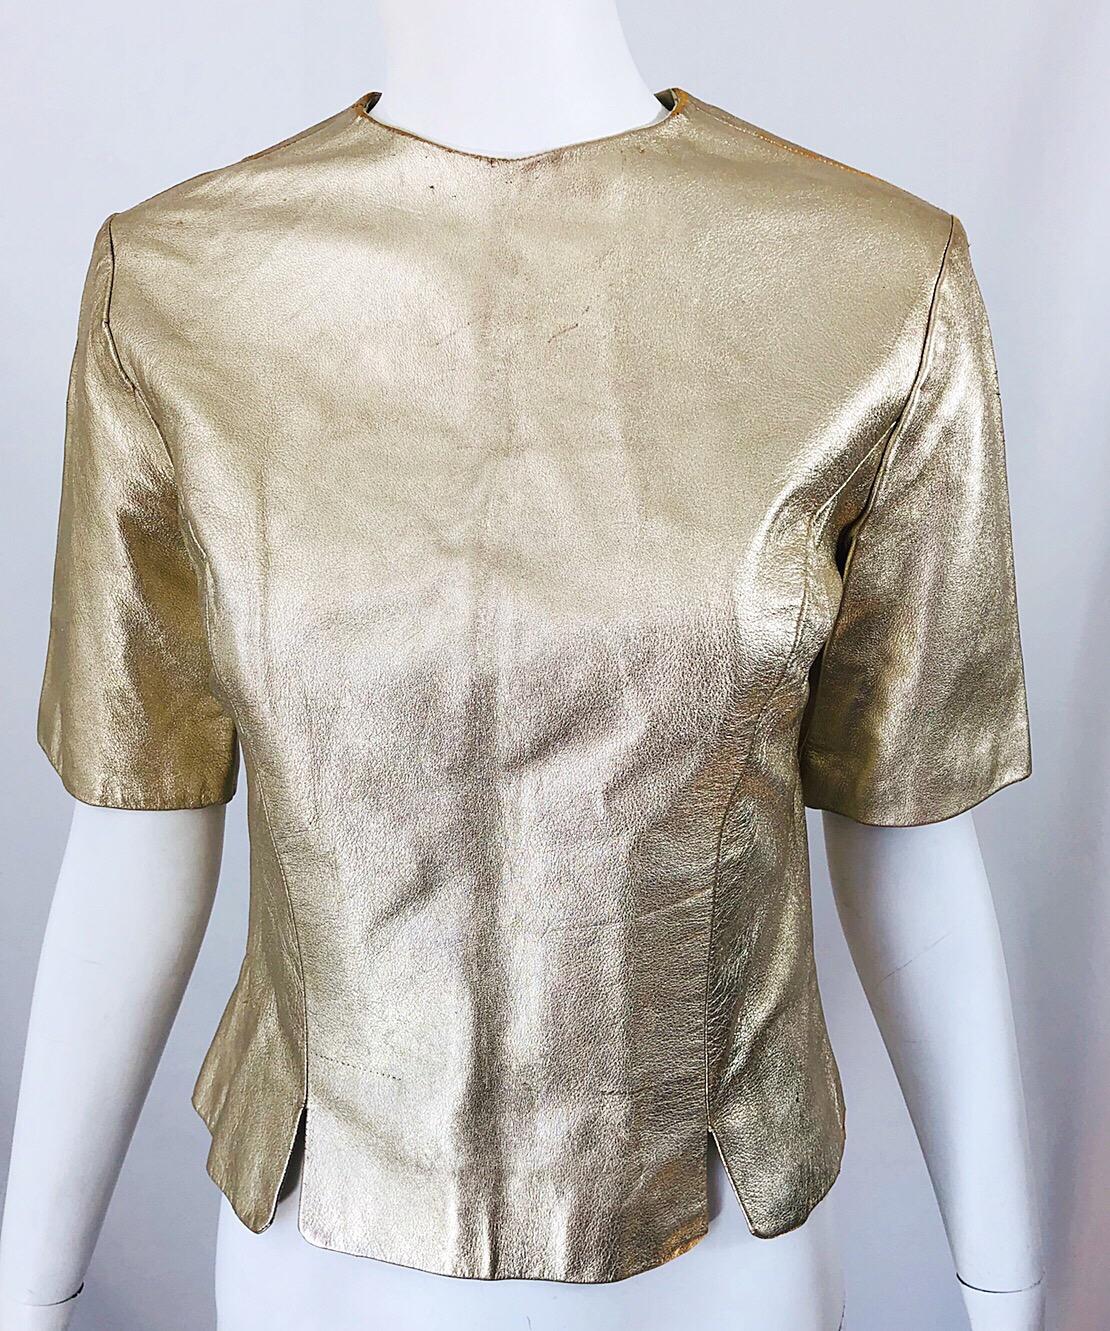 1980s Gold Leather Distressed Fabulous Vintage 80s Shirt / Top / Blouse 4